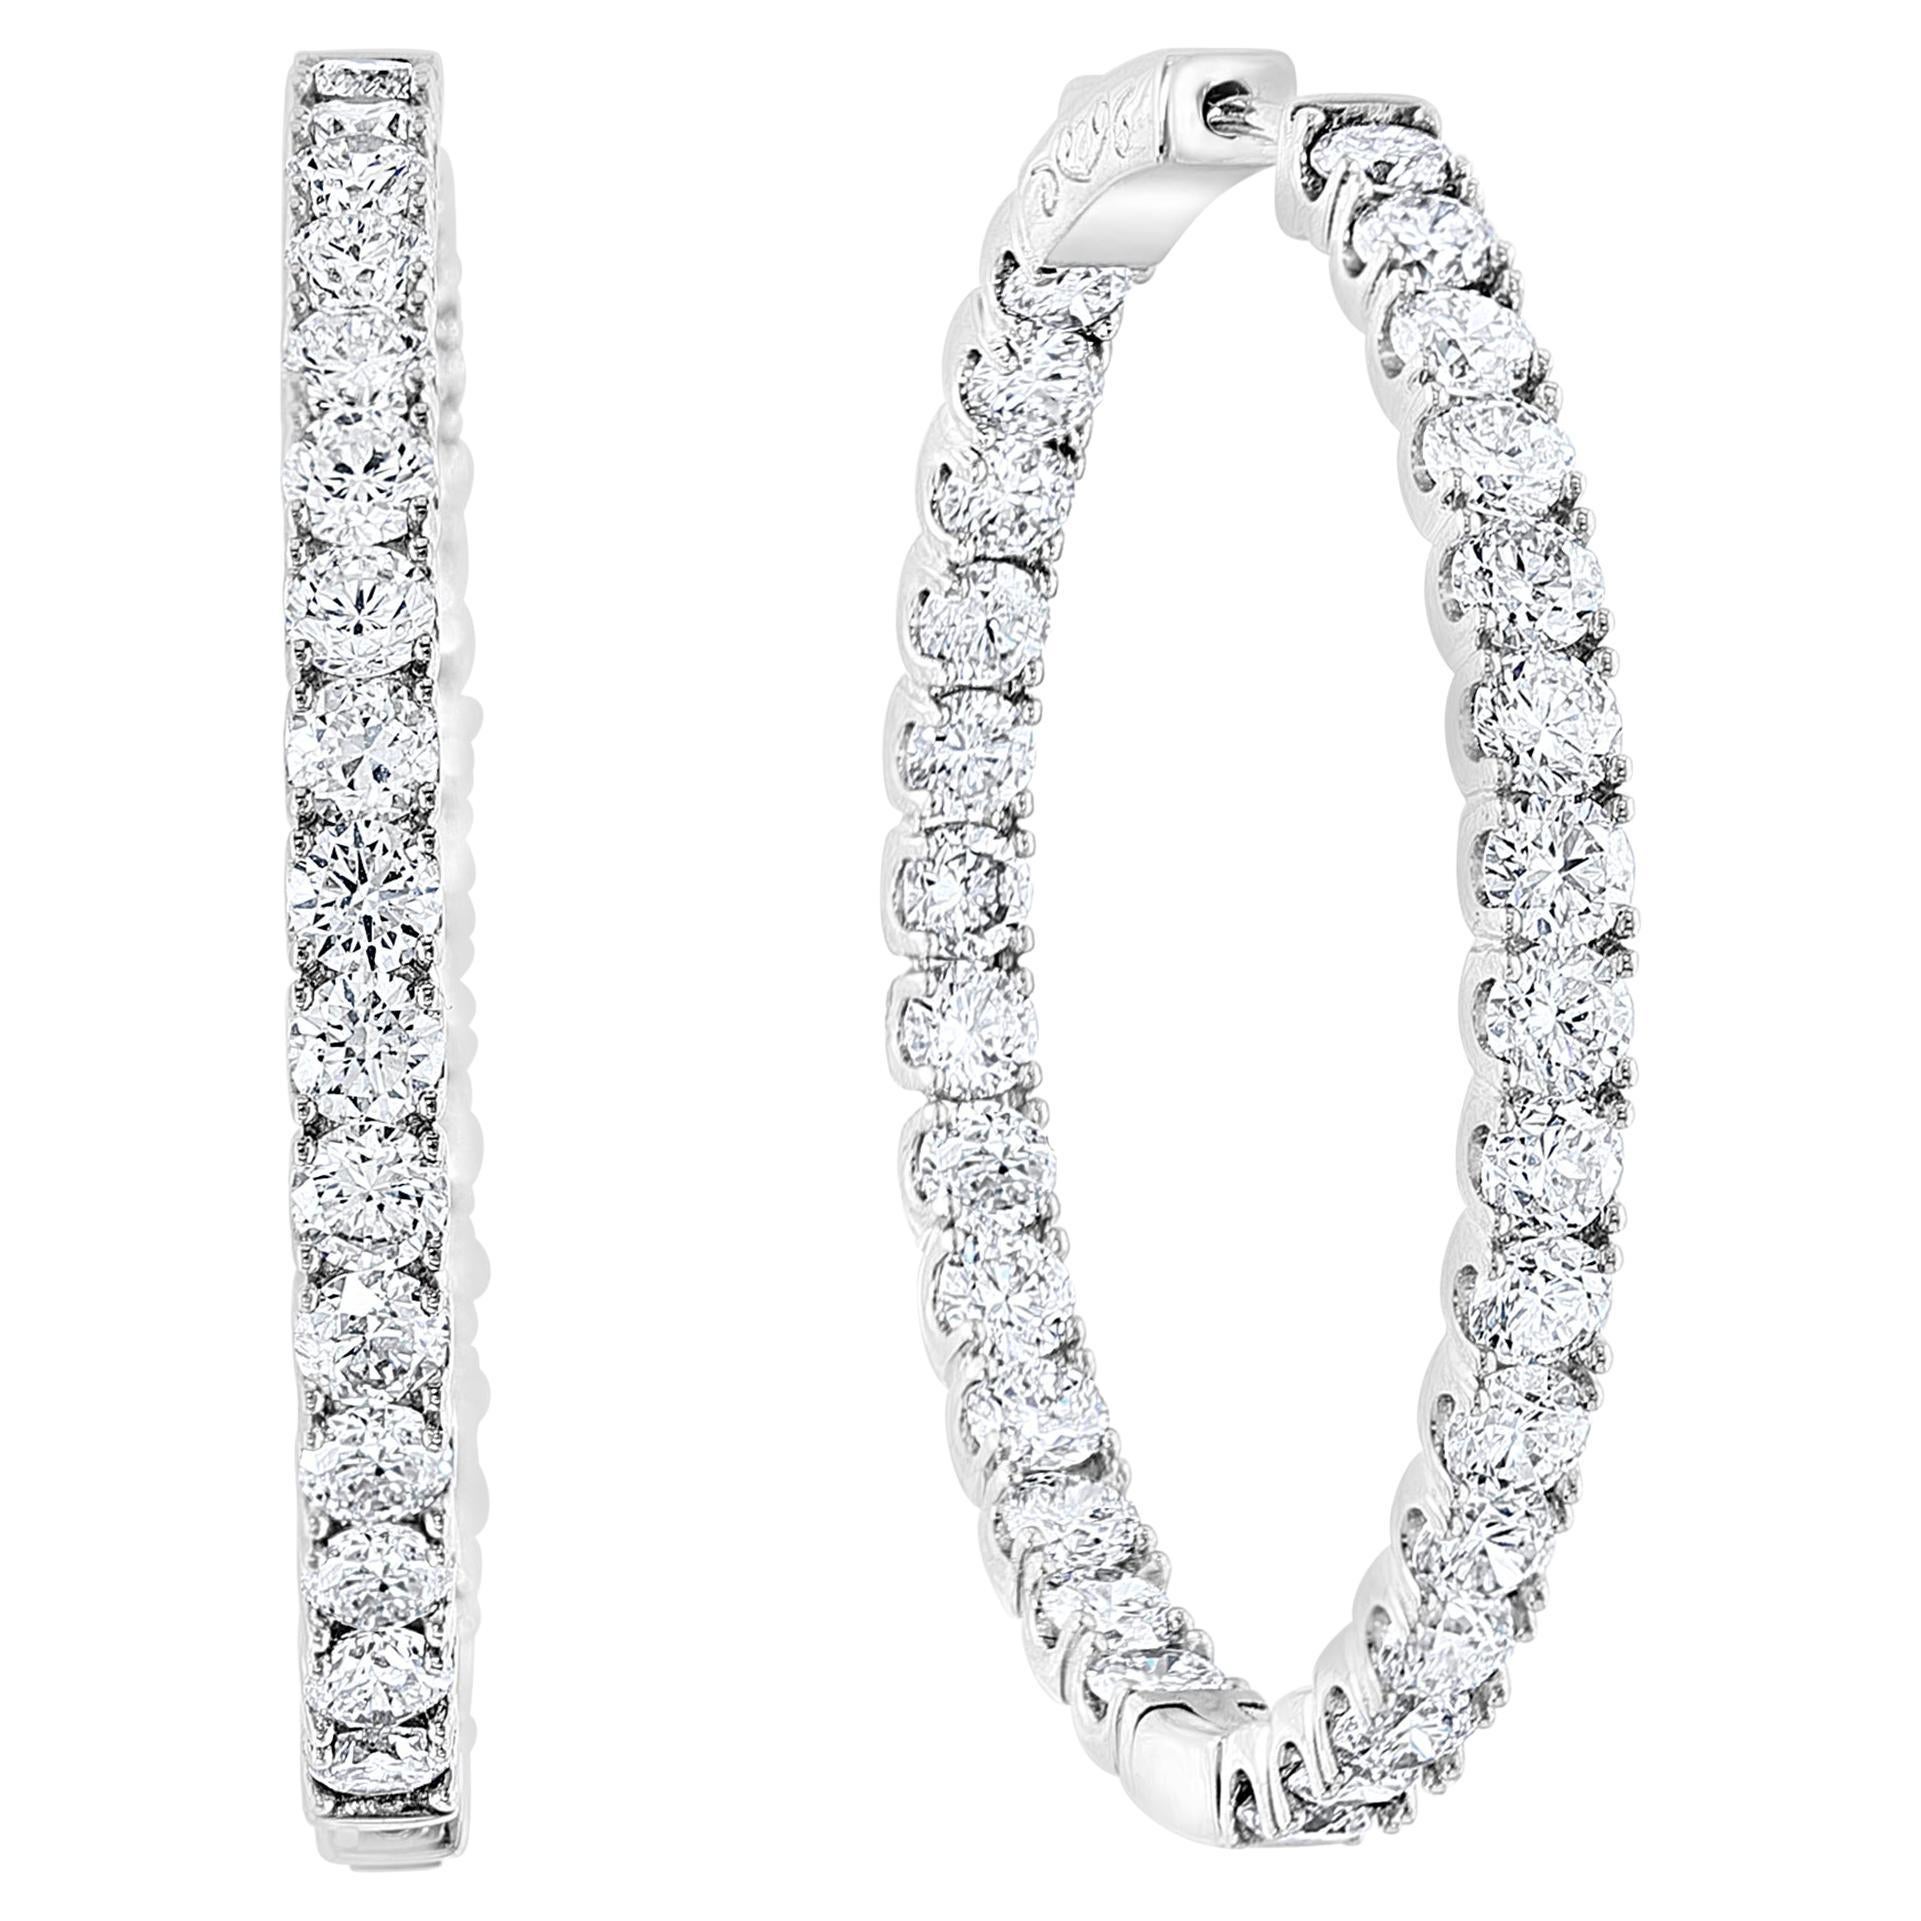 10.5  Carat  21 Pieces in each hoop  Diamond Inside Out Hoop Gala Cocktail Earrings in 14 Karat White Gold
A fabulous pair of earrings with an enormous amount of look and sparkle! 
These Hoops are Oval in shape 
These exquisite pair of earrings